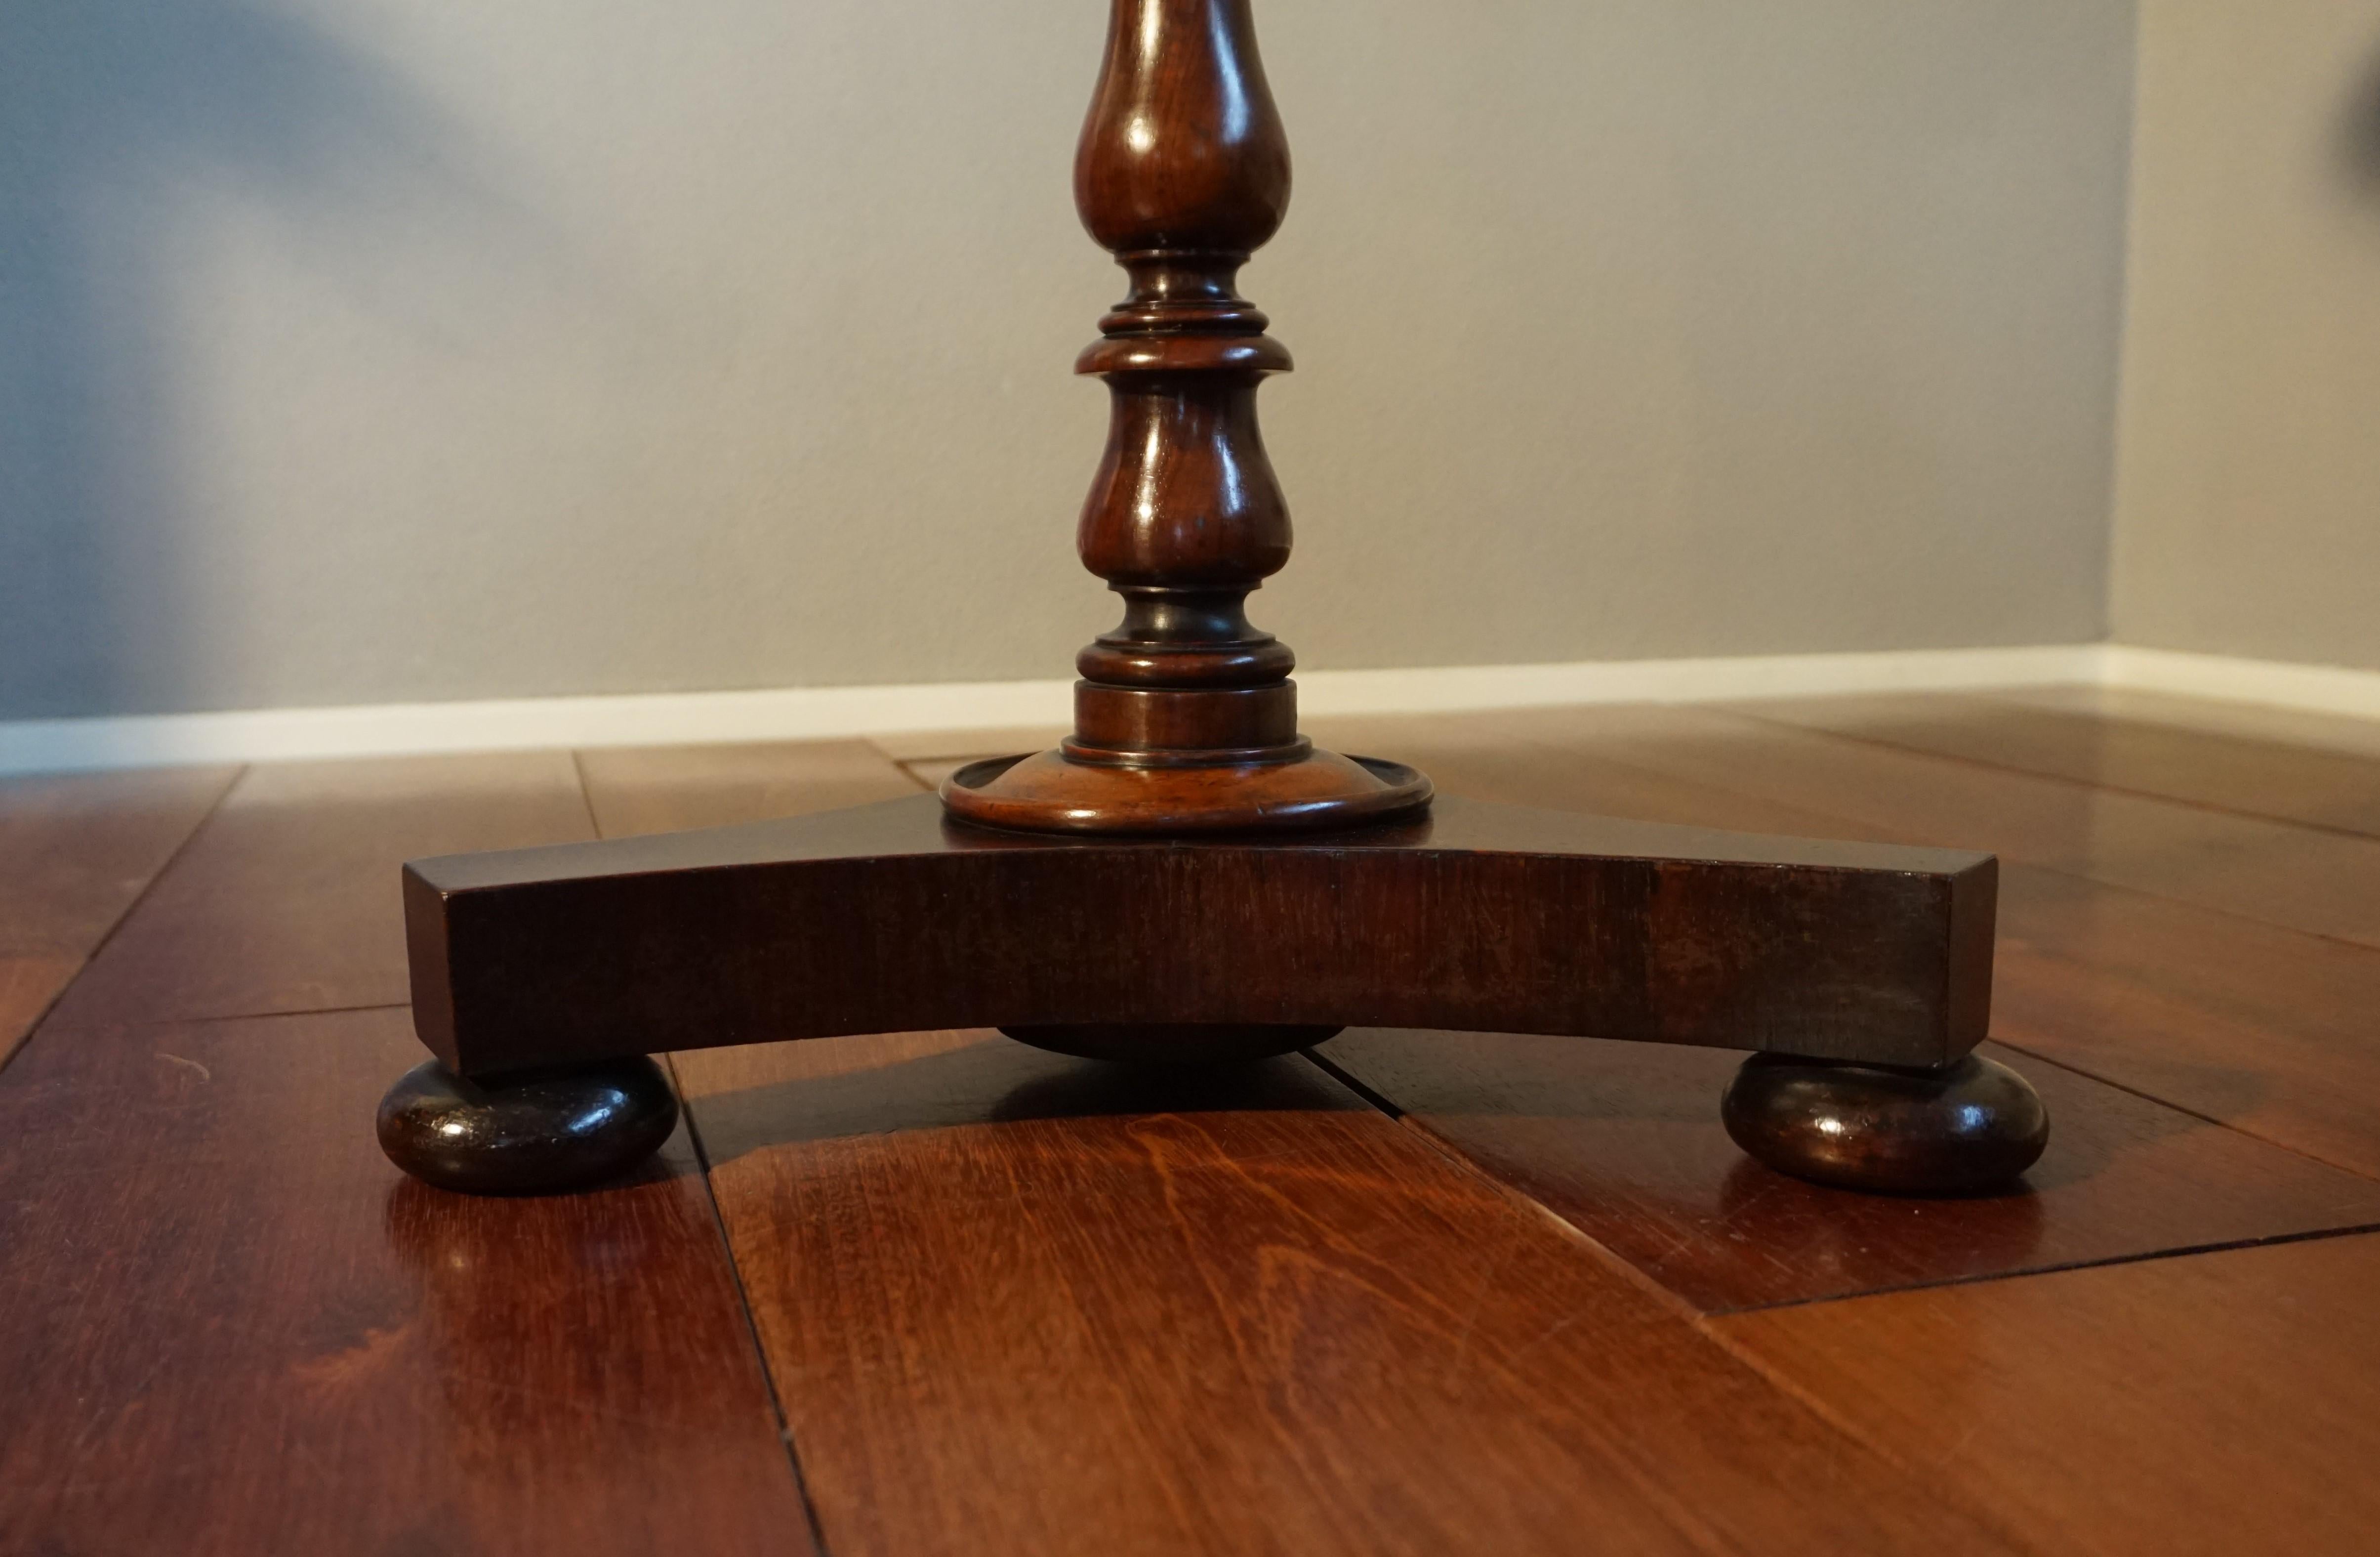 Hand-Crafted Stunning Early 1800s Georgian Tripod Wine Table / End Table with Amazing Patina